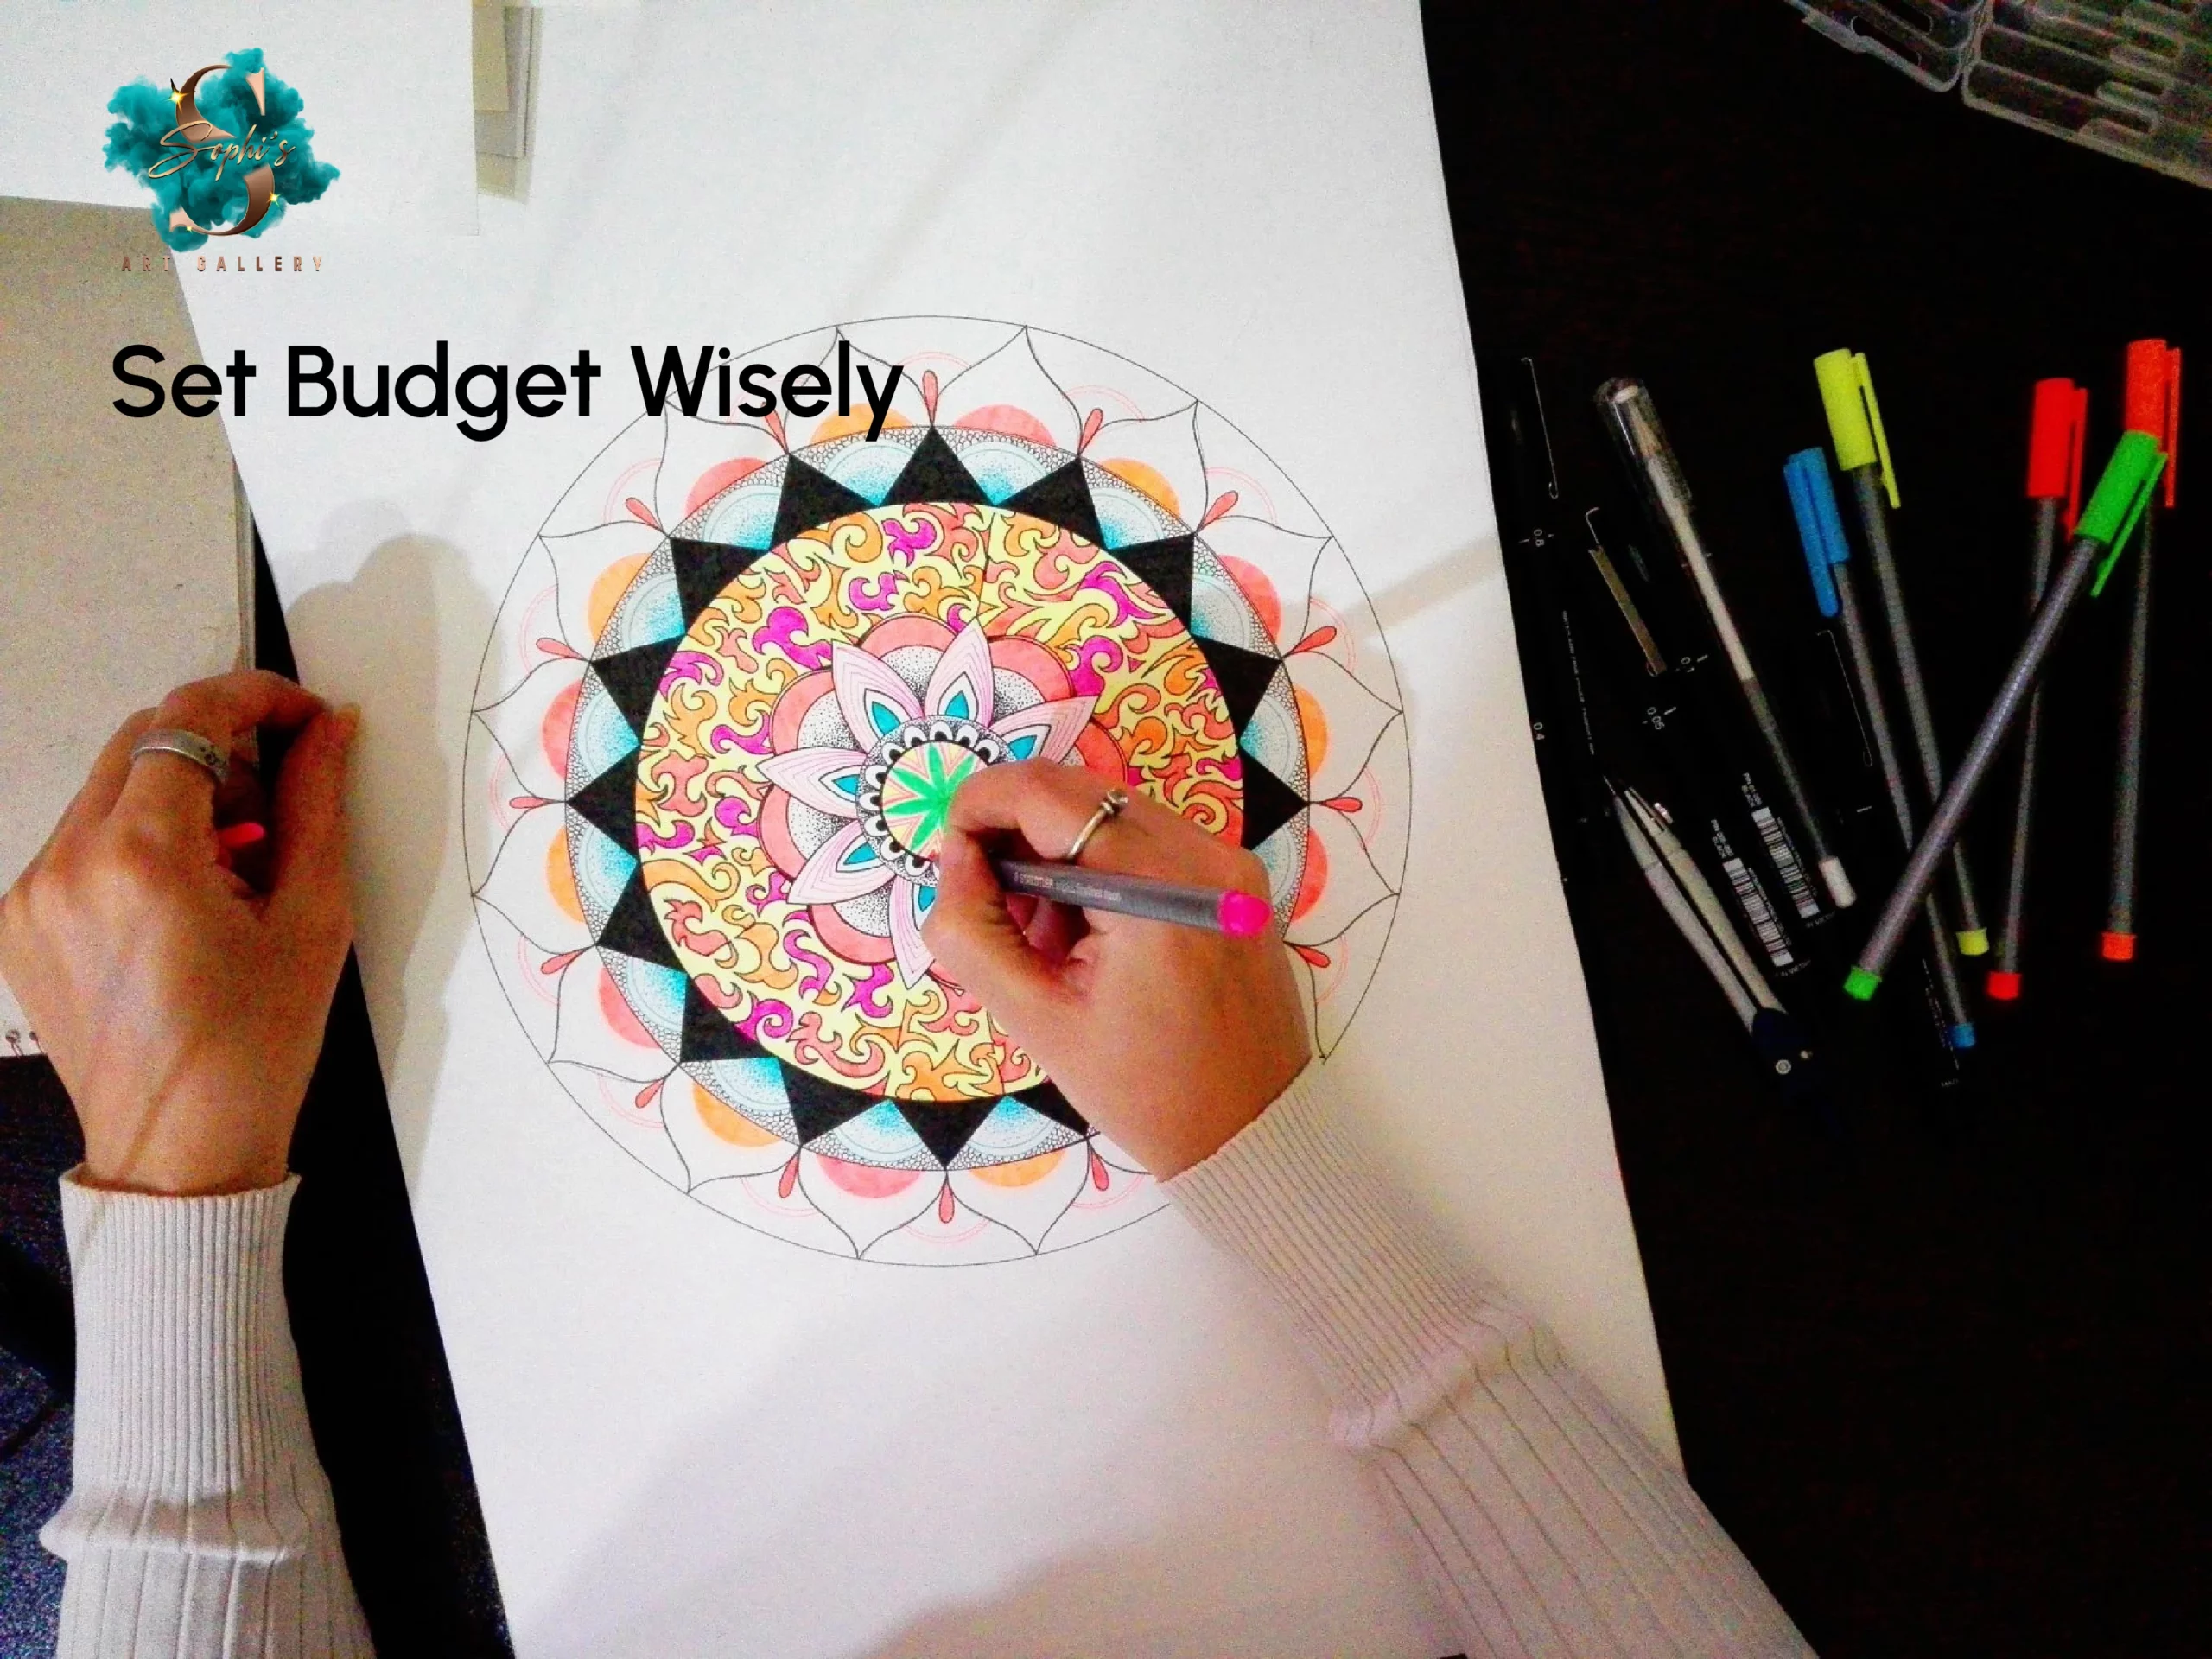 Set Budget Wisely